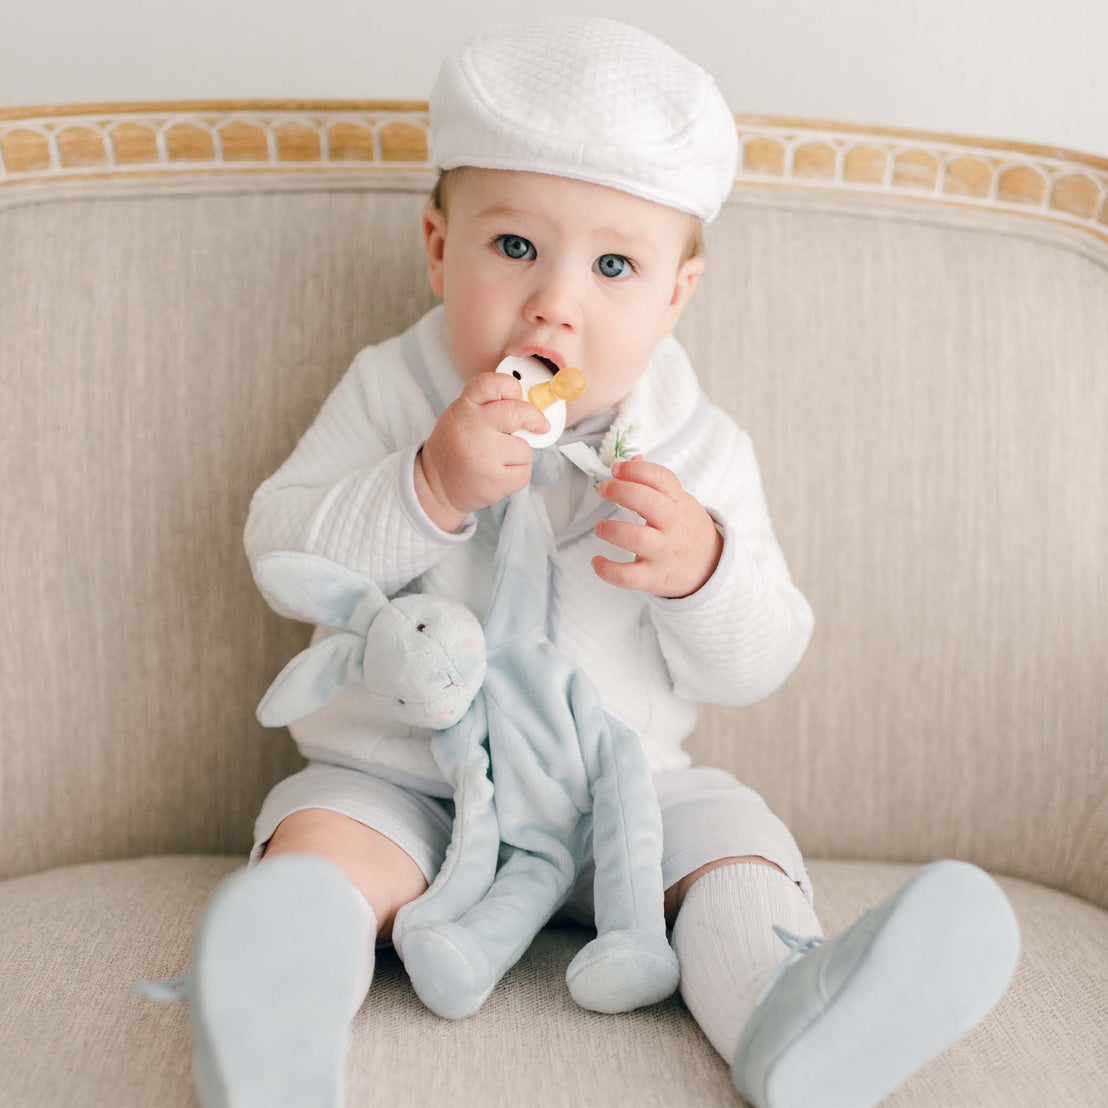 Baby boy sitting on a chair and wearing the Harrison 3-Piece Shorts Suit. He is also holding a Harrison Silly Bunny Buddy with a pacifier attached